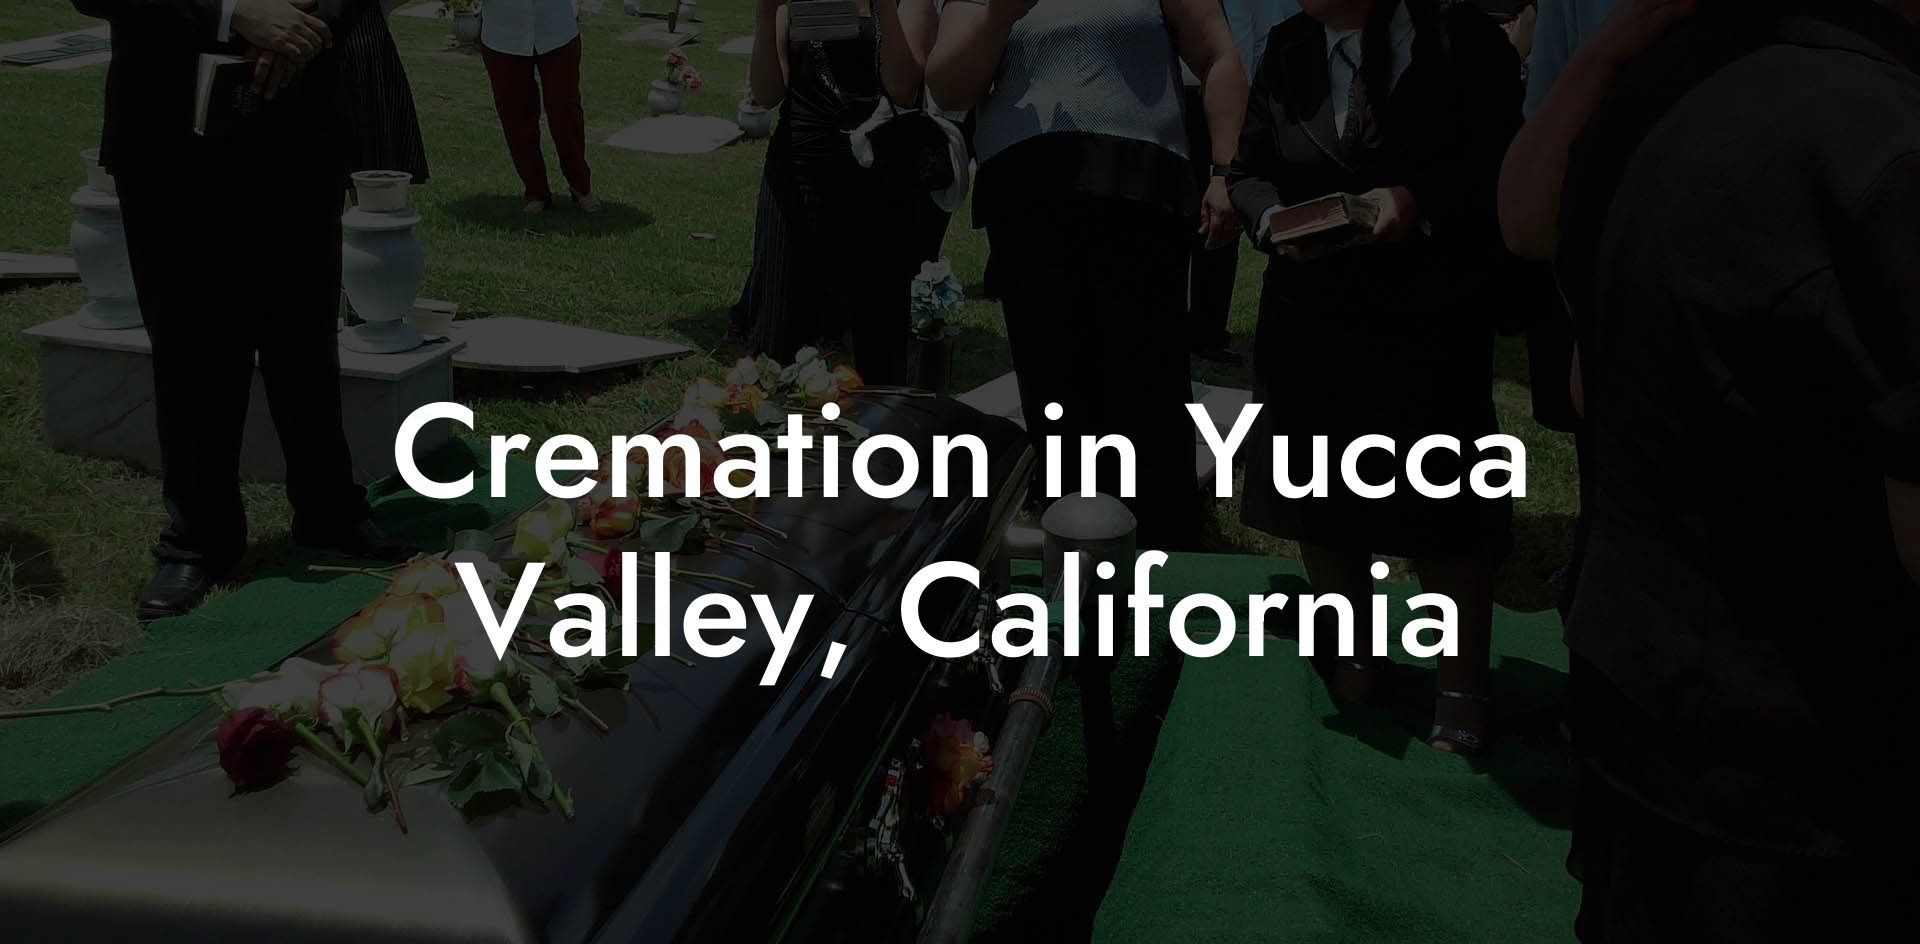 Cremation in Yucca Valley, California